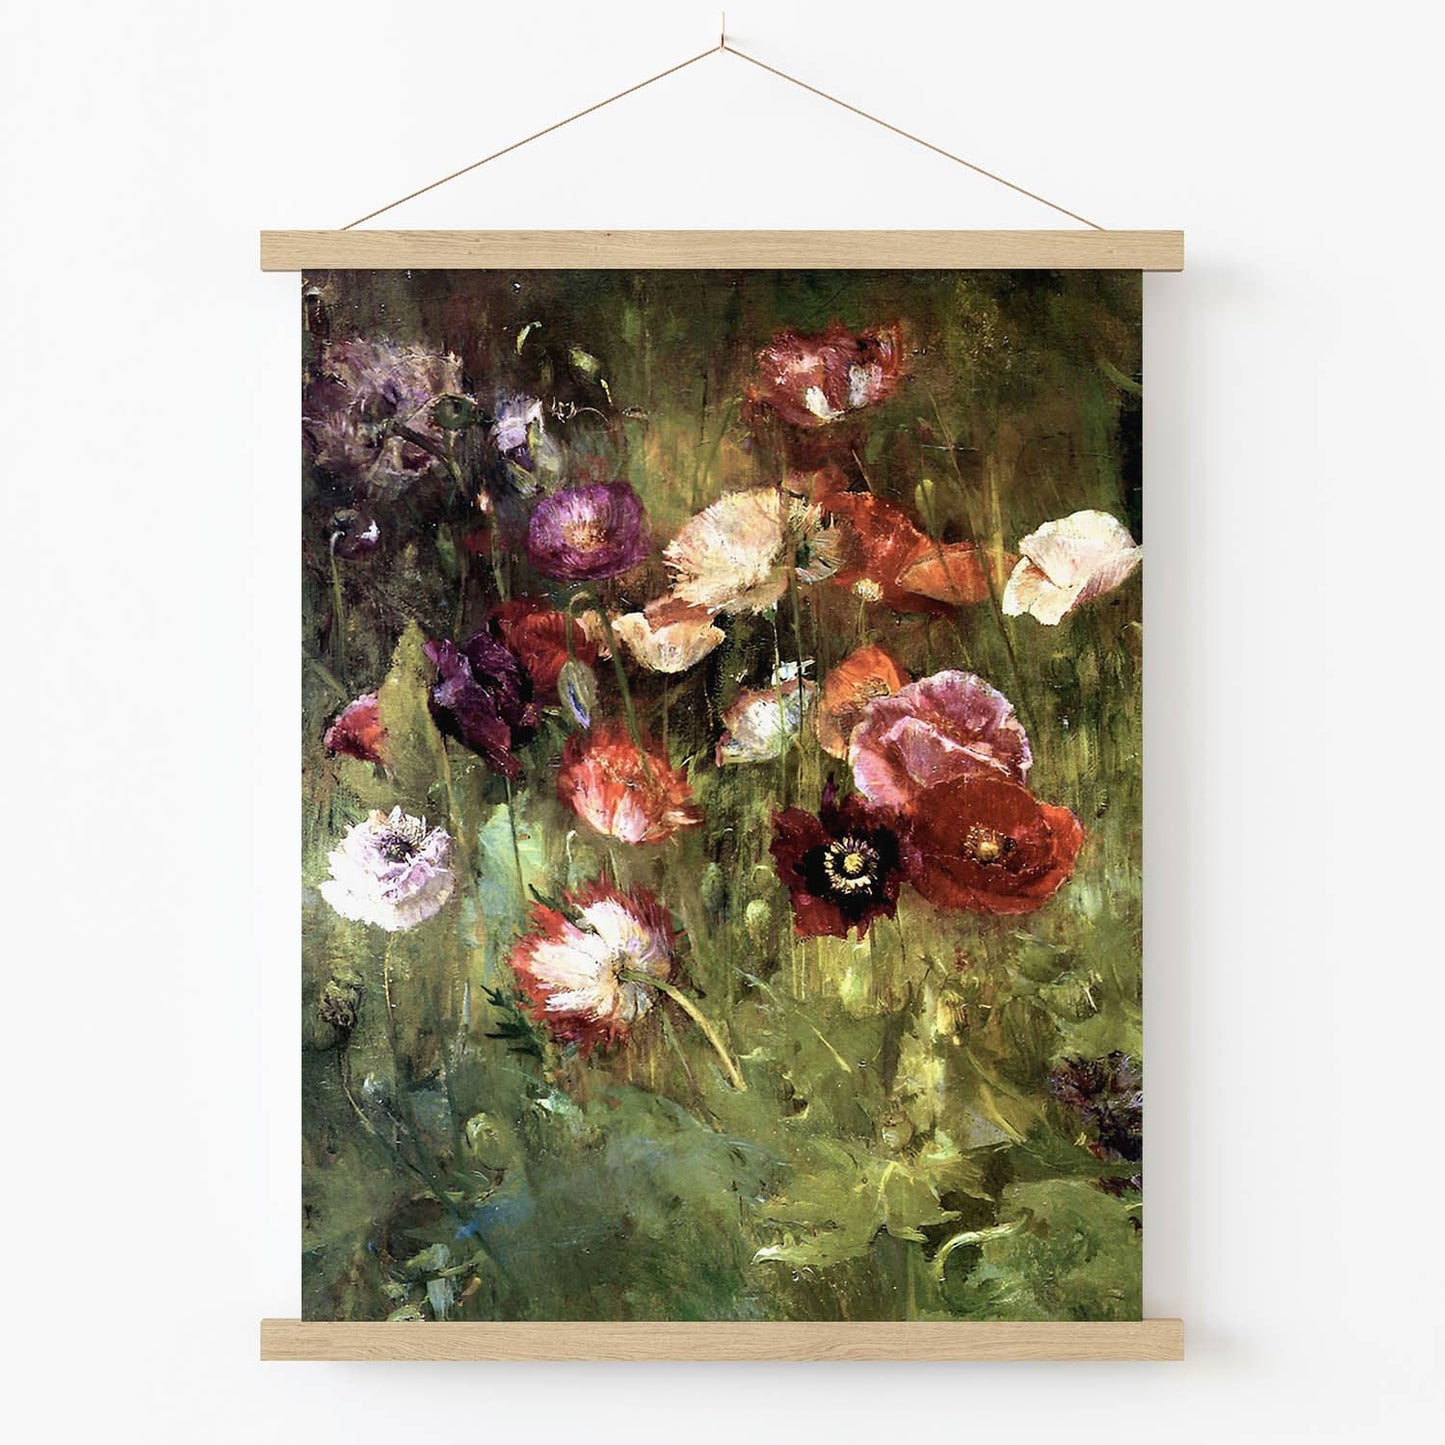 Abstract Flower Art Print in Wood Hanger Frame on Wall